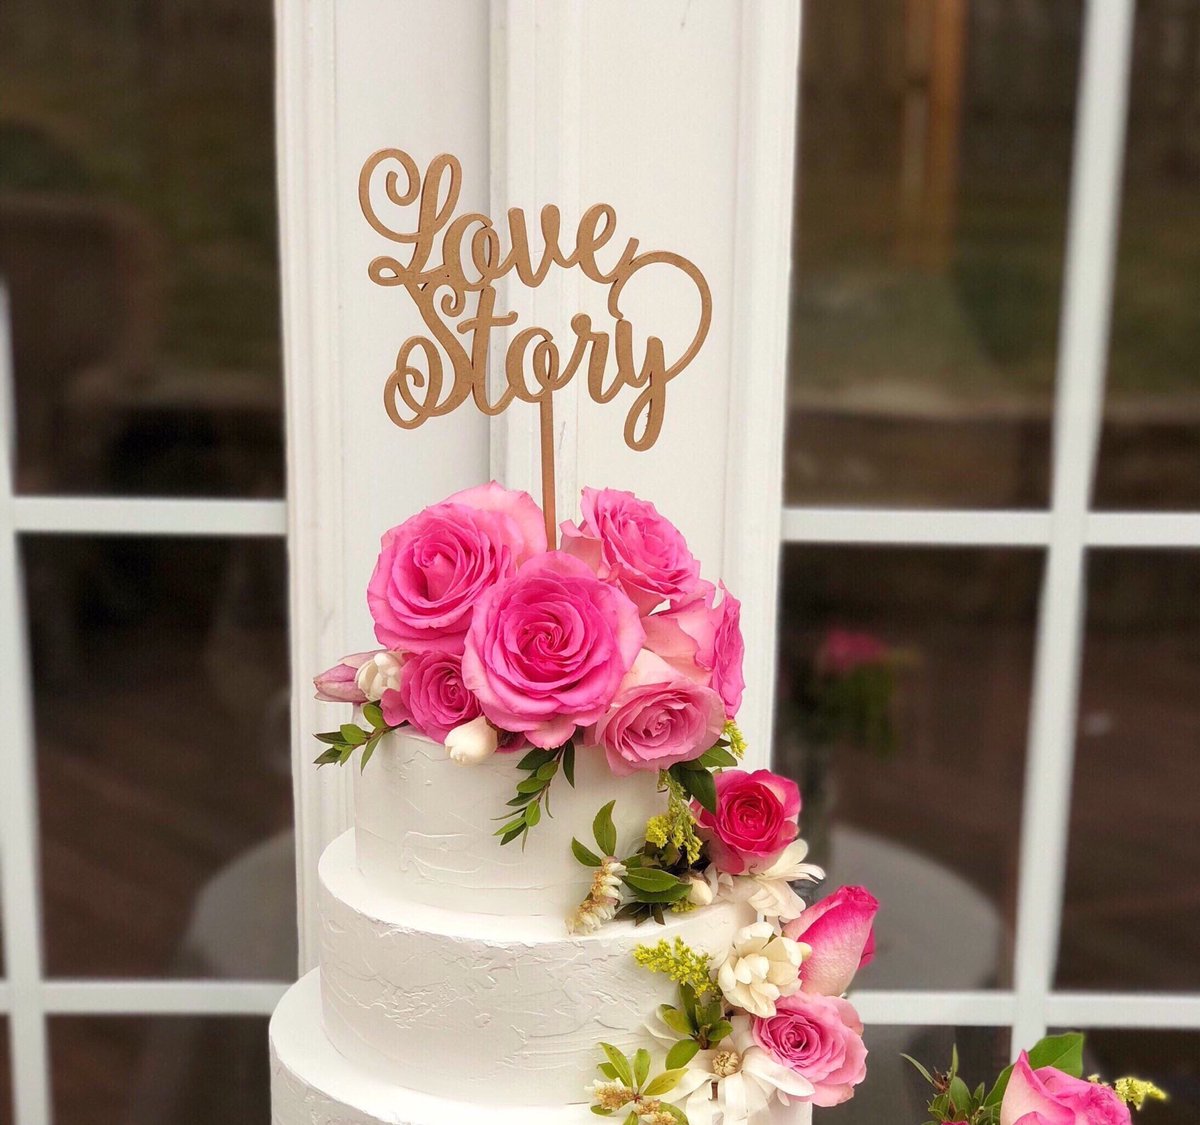 Excited to share this item from my #etsy shop: Love Story Cake Topper - Gold Cake Topper - Heirloom Cake Topper #wedding #fairytaleprincess #lovestorycaketopp #lovestory #lovecaketopper #lovearrowcaketopper #weddingcaketopper #cuteengagementcake etsy.me/40RkVYD